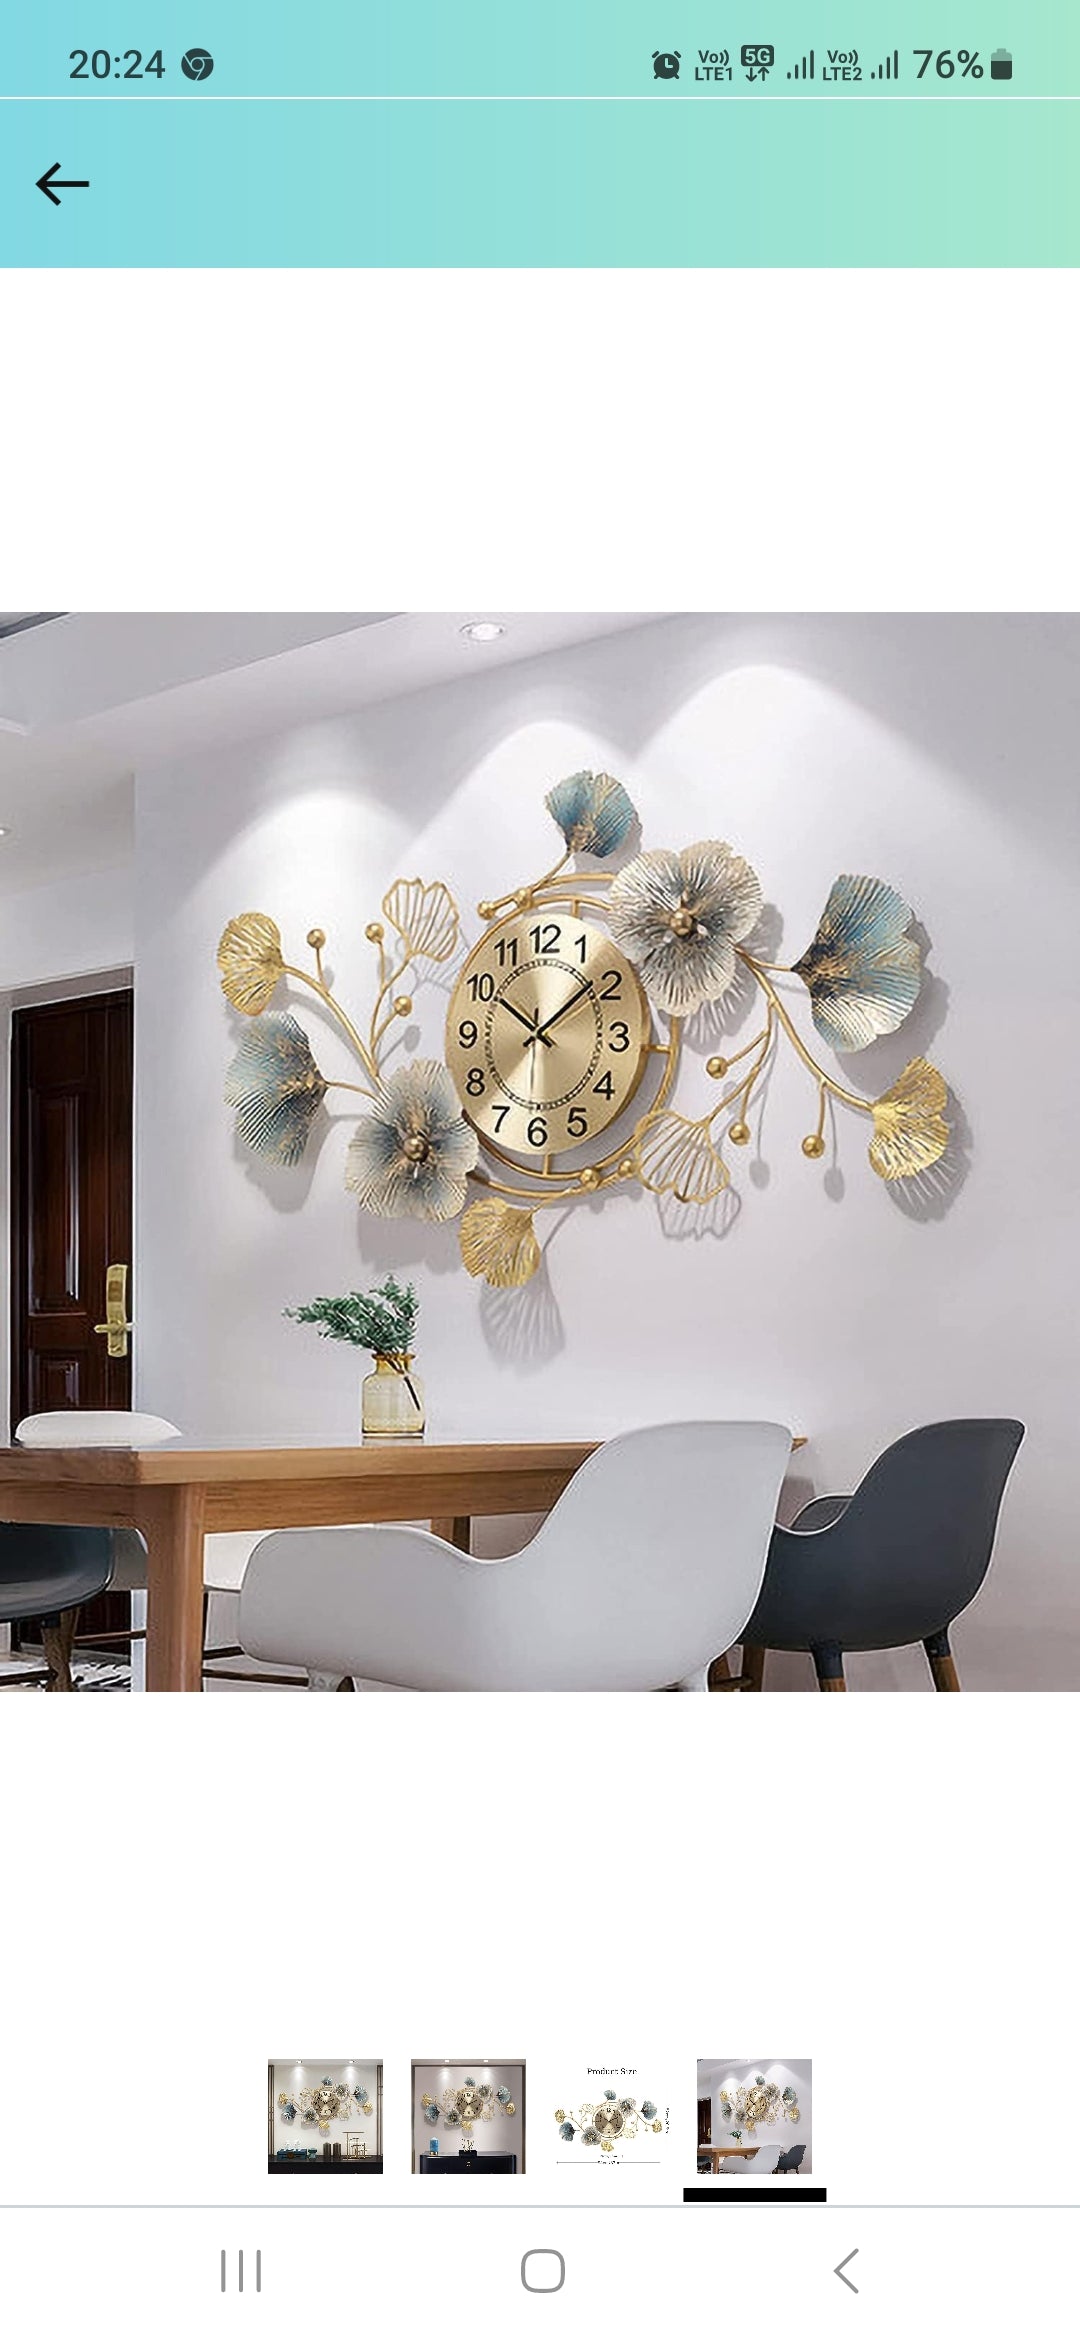 Metal Hanging Wall Clock Panel Floral Decorative For Farm House / Living Room / Bedroom / Hall / Dining Hall Decoration With Antique Design & Glossy Finish